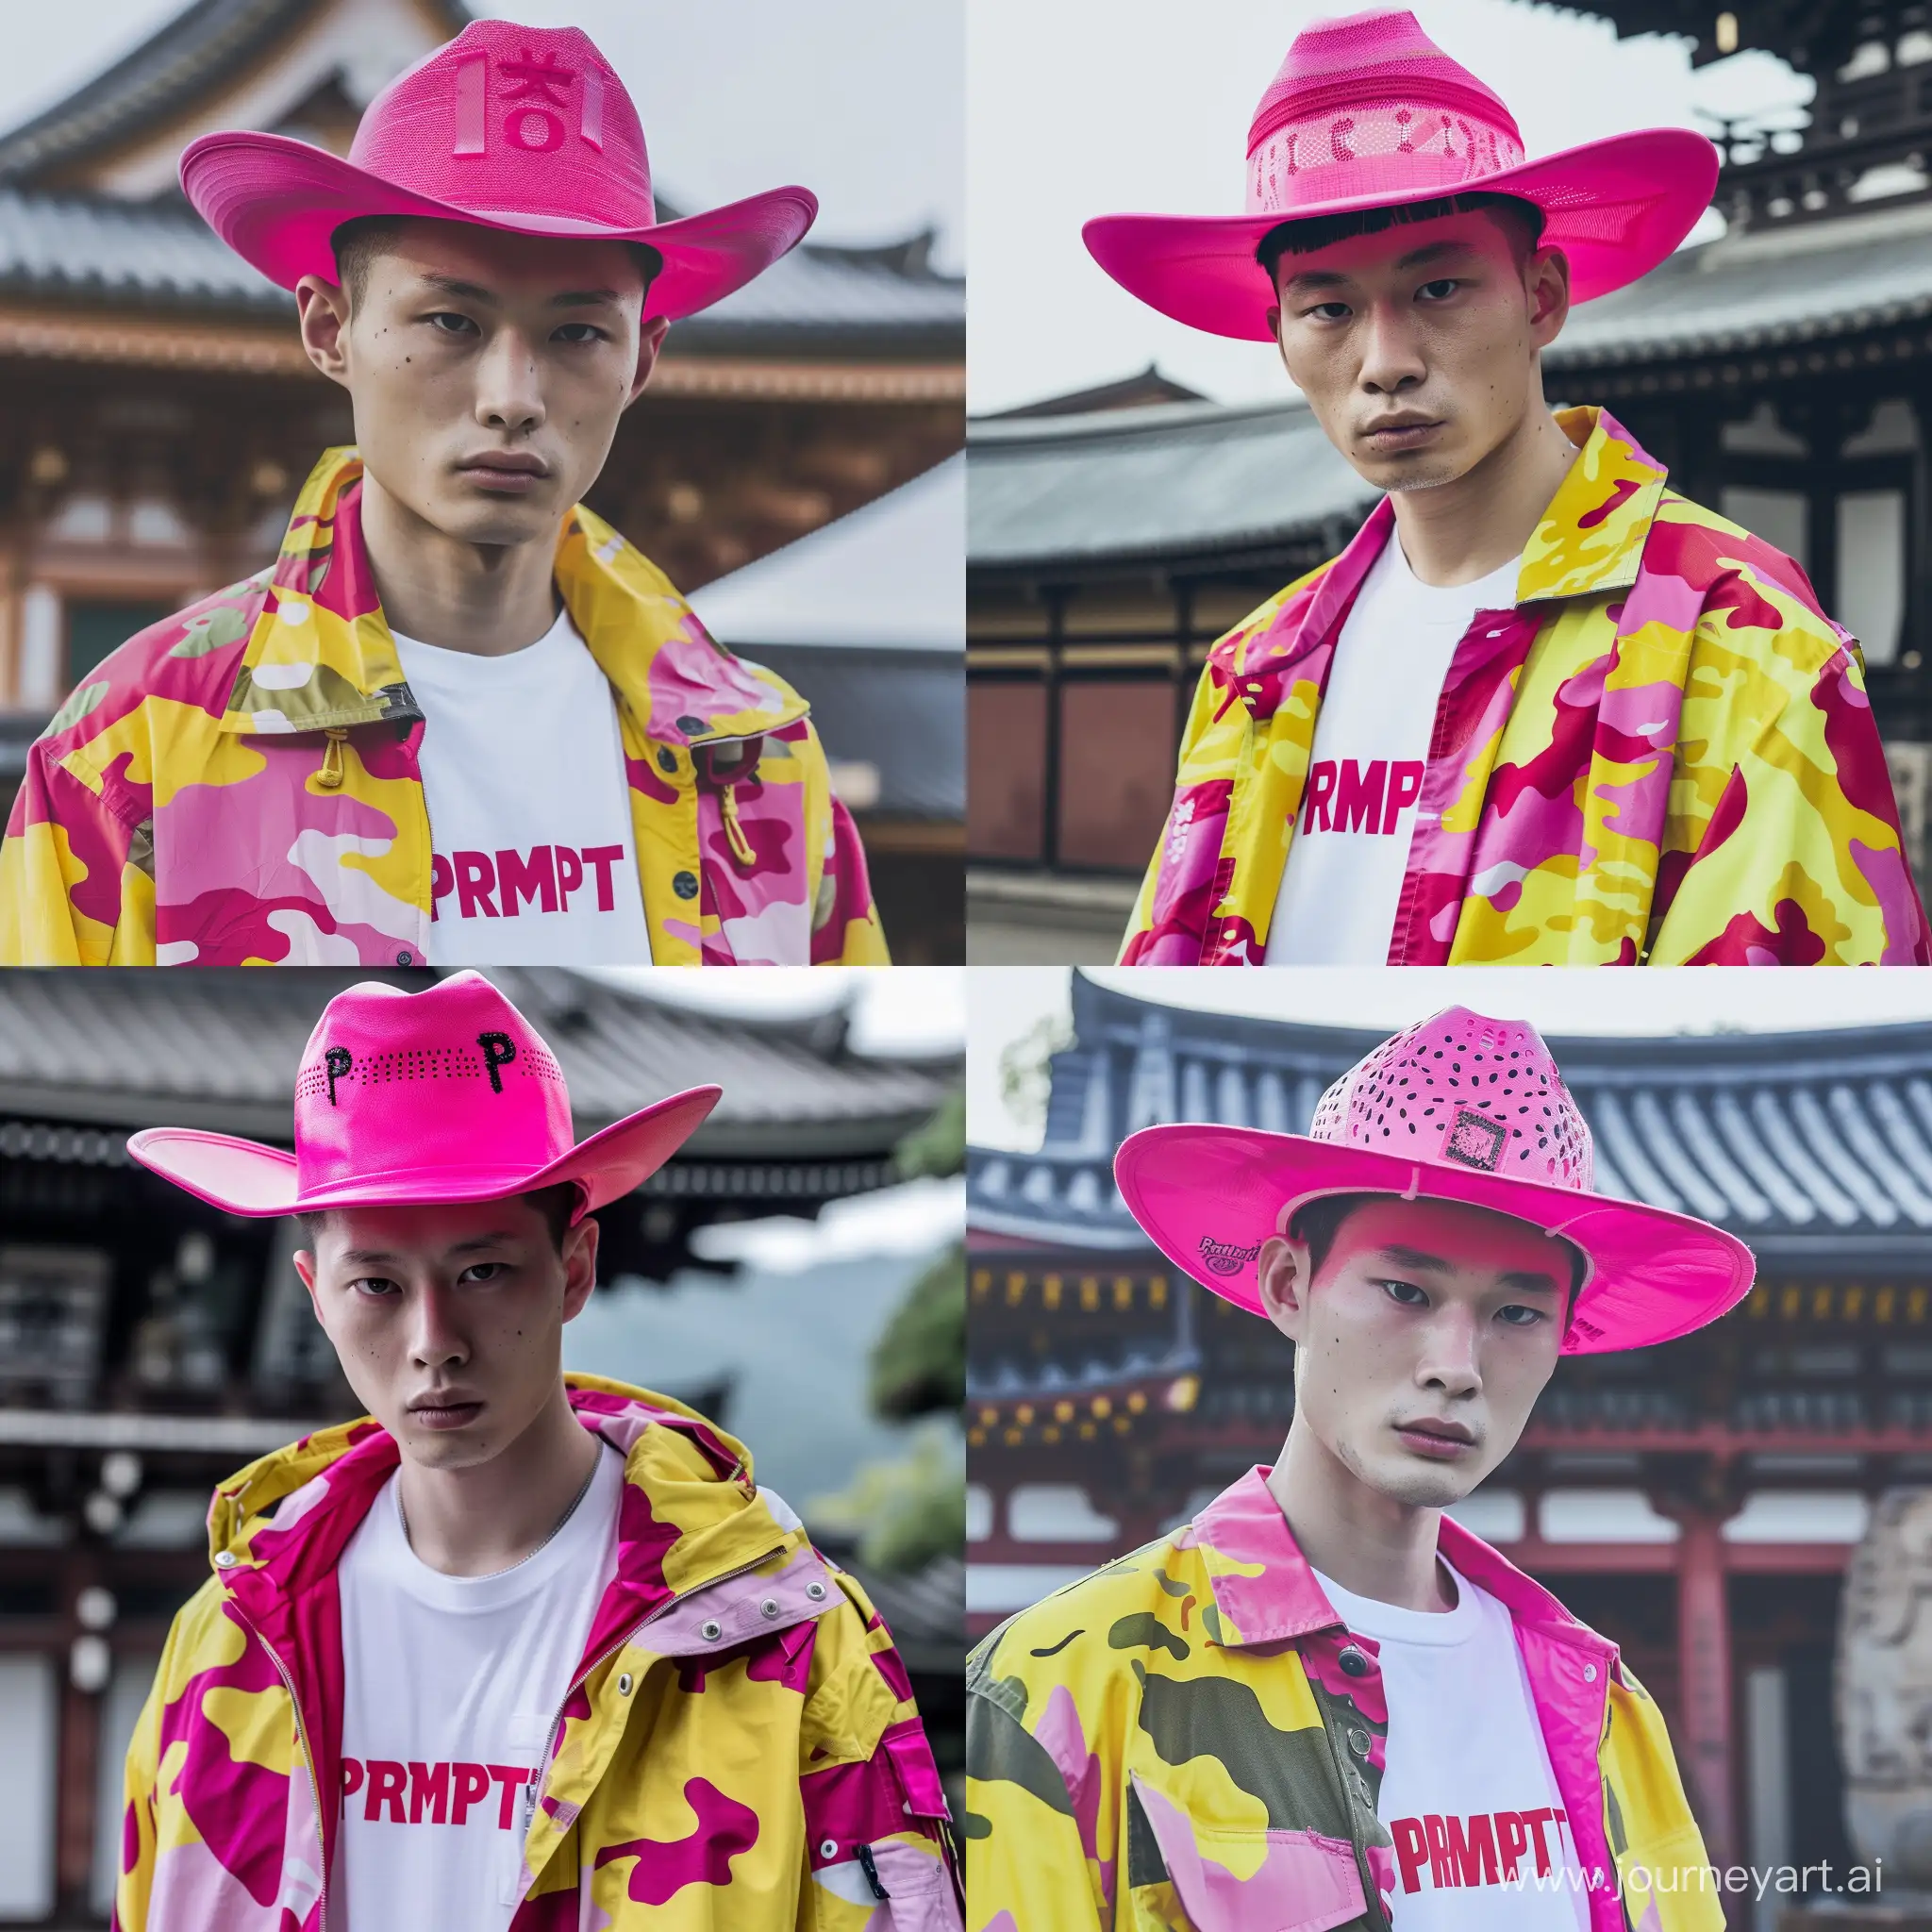 editorial fashion shot, asian ethnicity, male, short black hair, intense gaze, pale complexion, neon pink cowboy hat, vibrant yellow and pink camo jacket, white tee with red “PRMPT” branding, traditional Japanese temple backdrop, high contrast daylight, vivid and playful mood